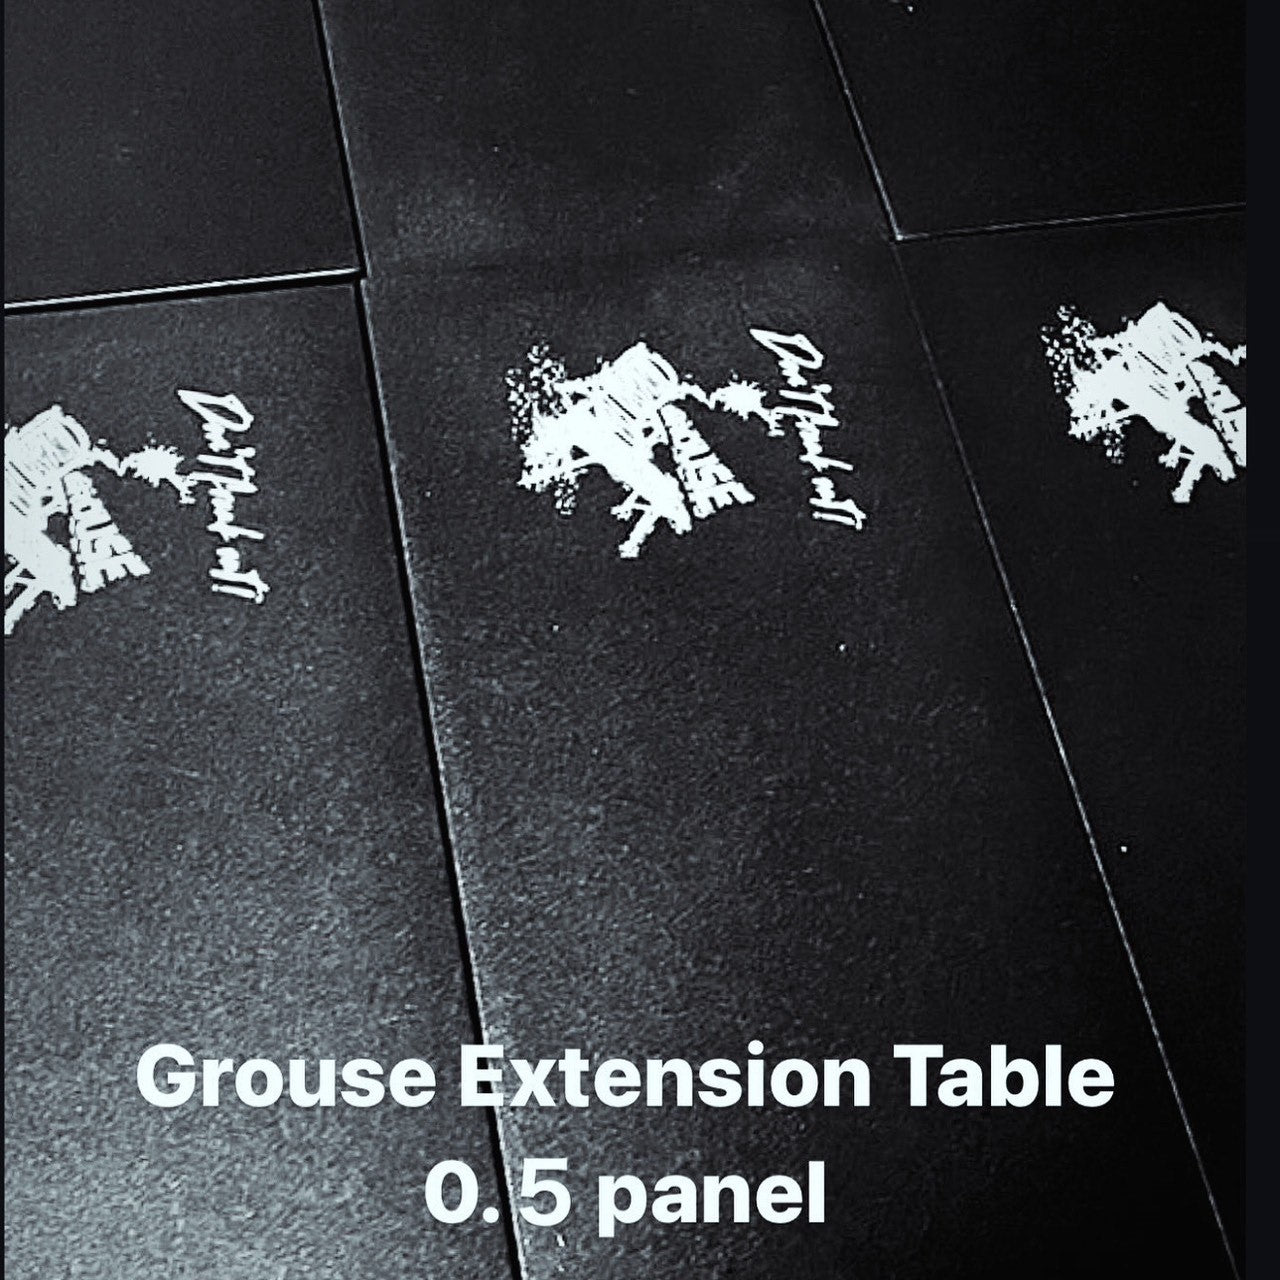 Grouse Extension Table